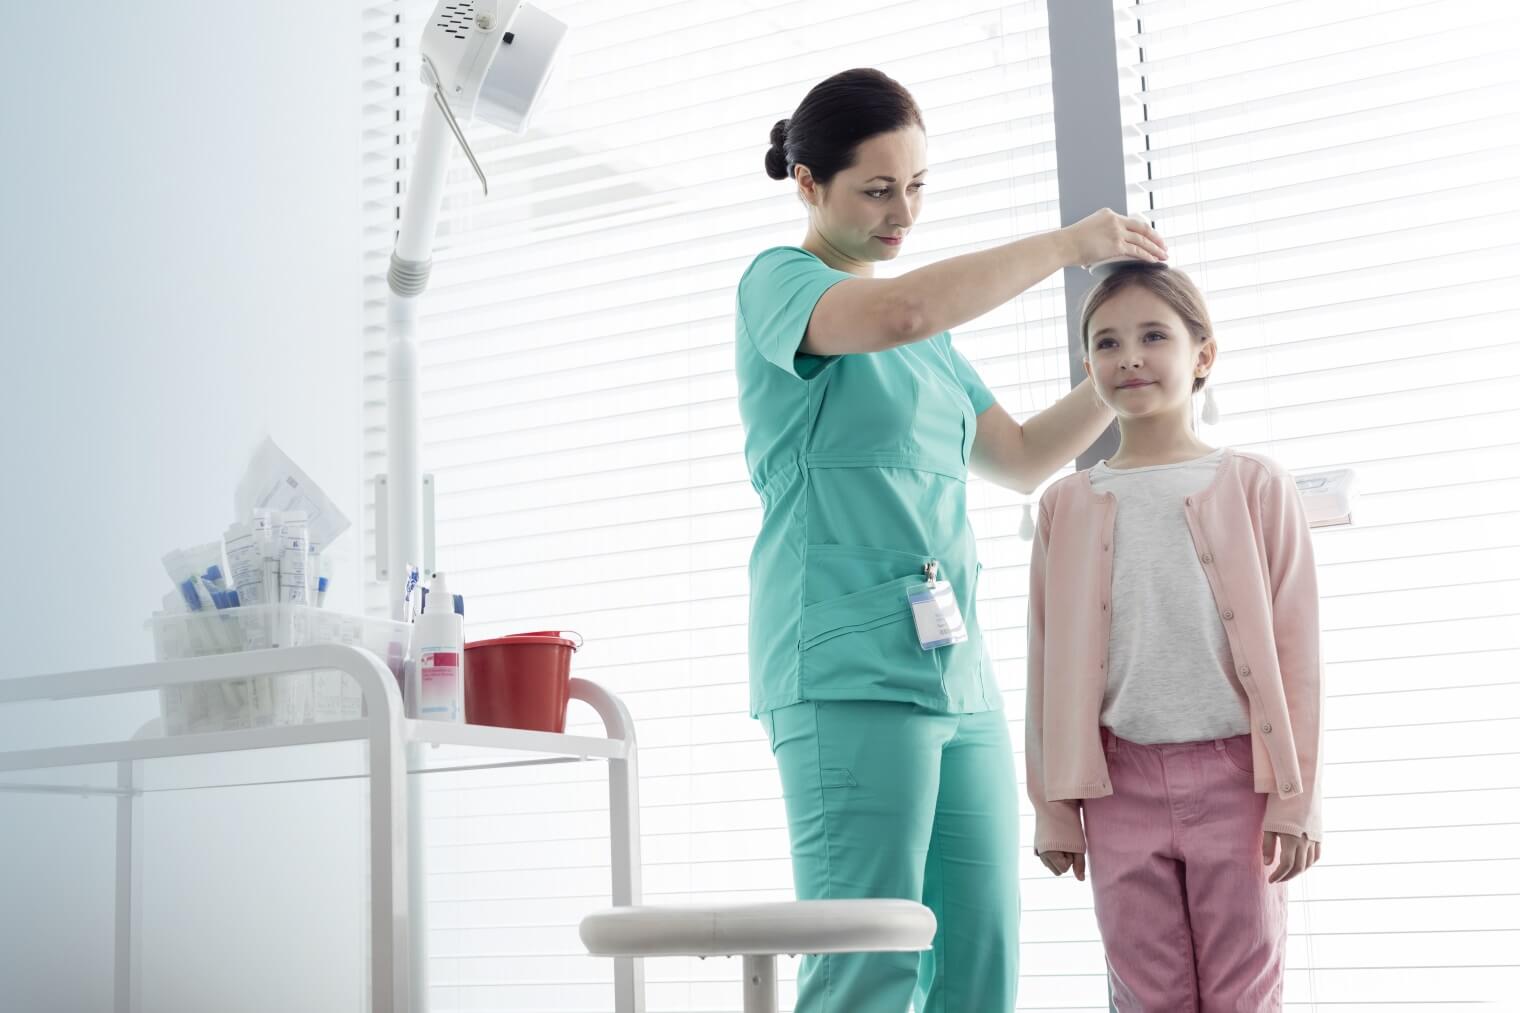 A doctor measures a young girl